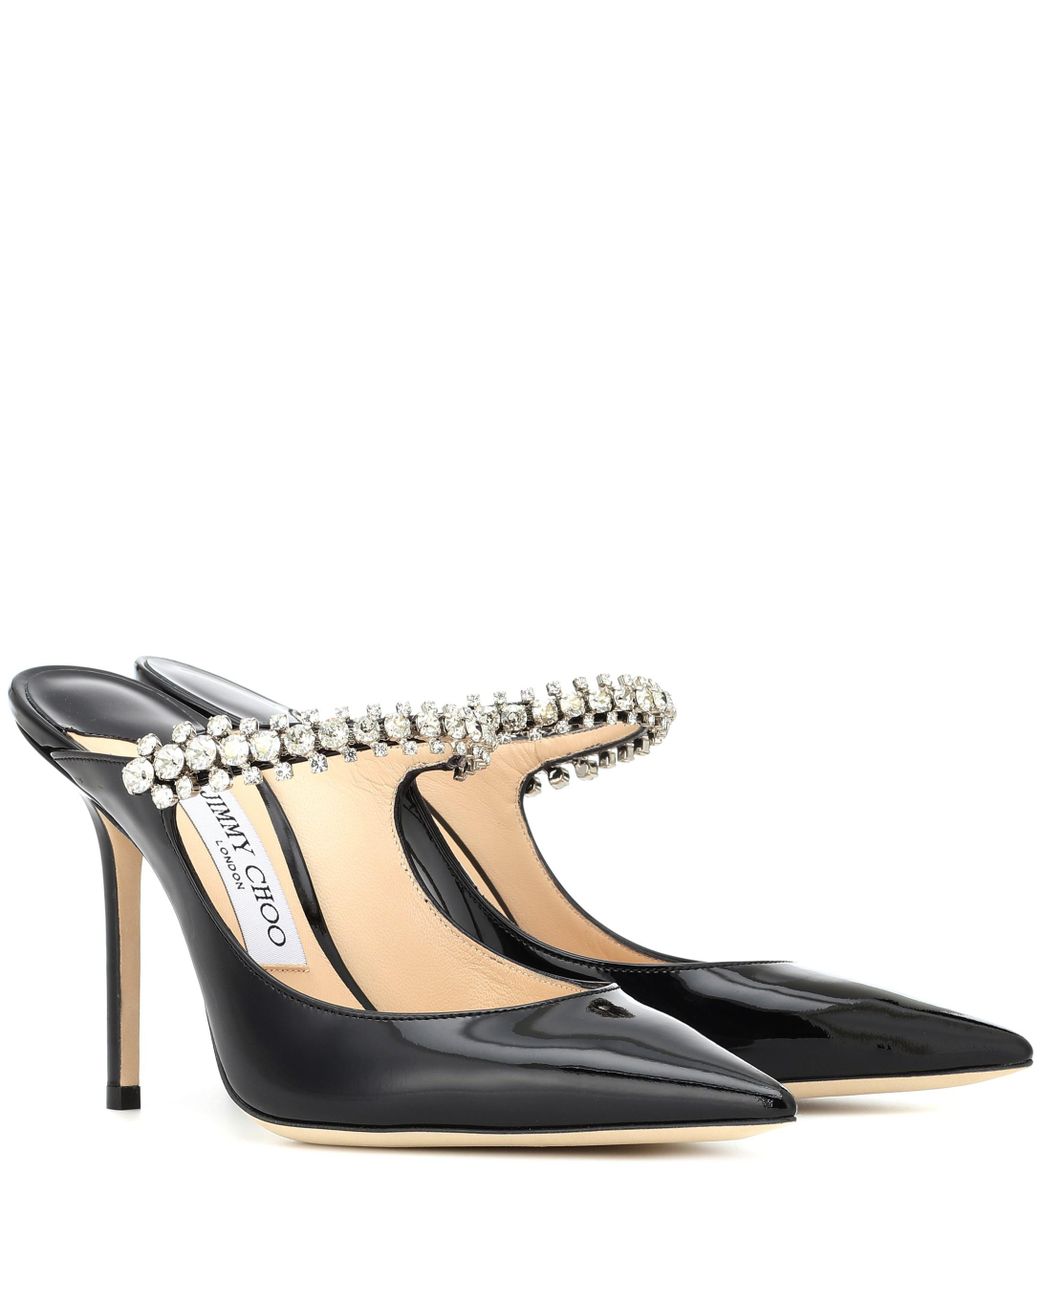 Jimmy Choo Leather Bing 100 Pumps in Black - Save 30% - Lyst